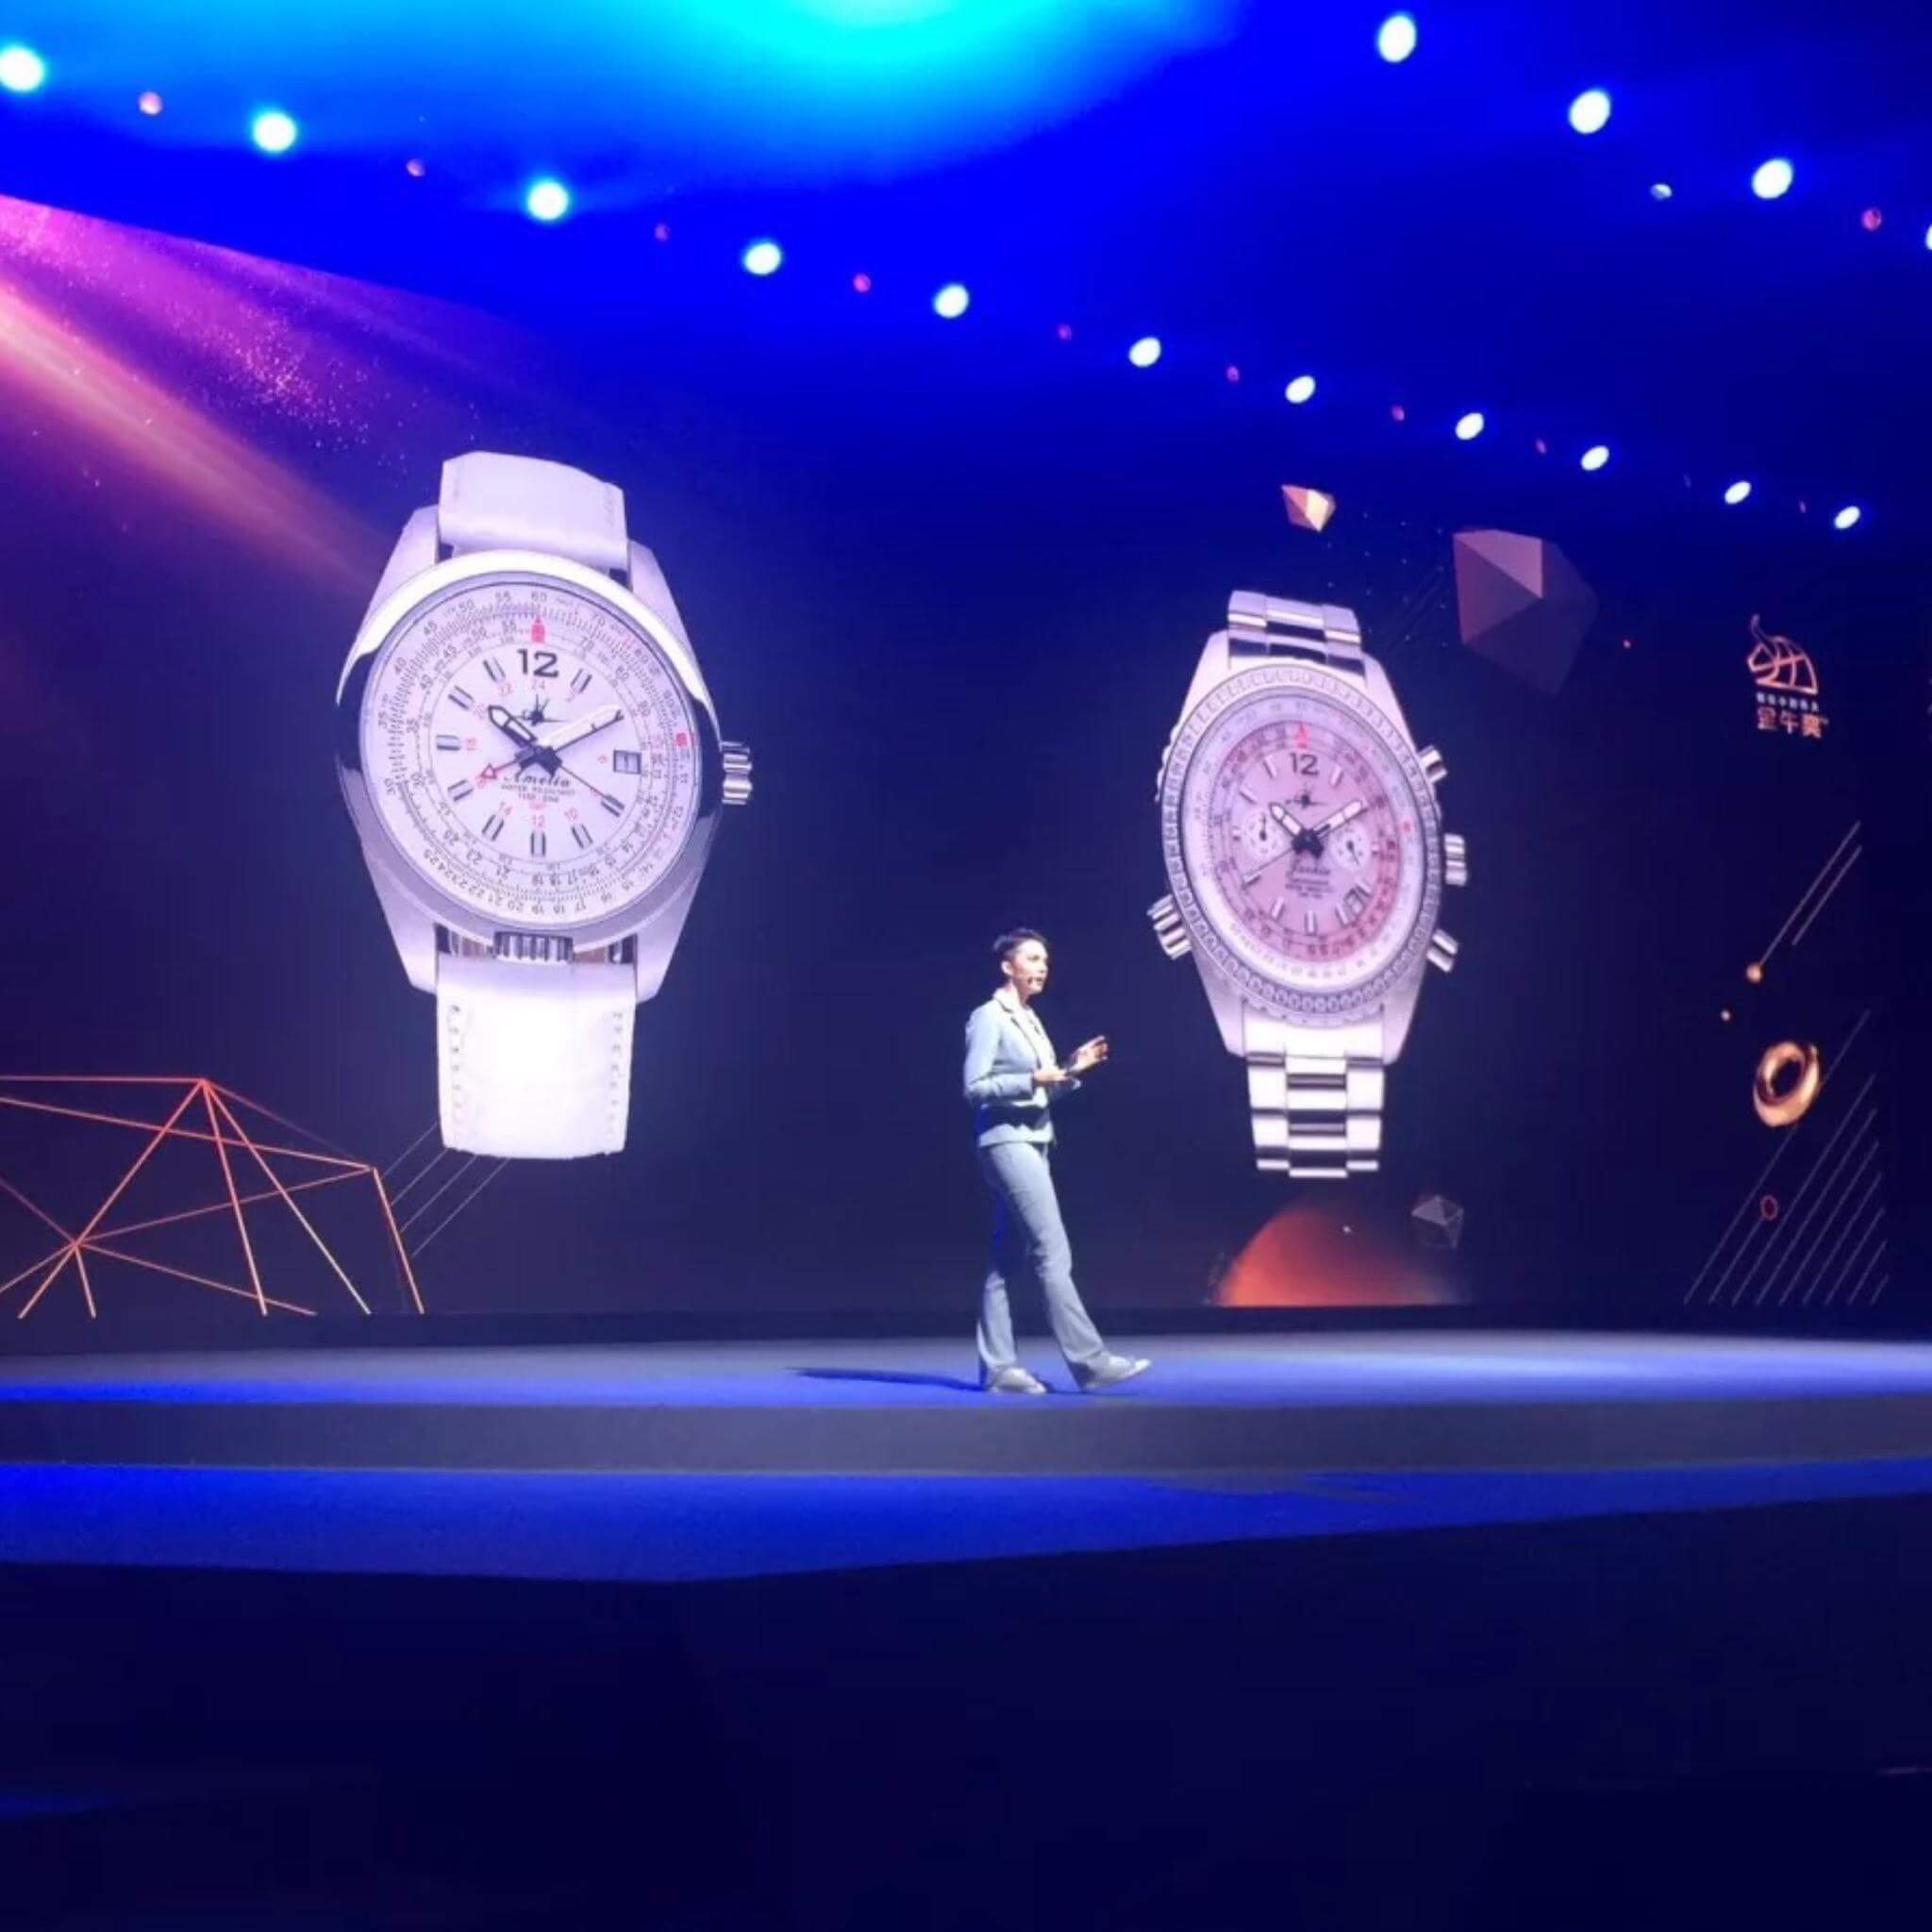 CEO and Founder, Abingdon Mullin, speaking on stage at an event about the watch business